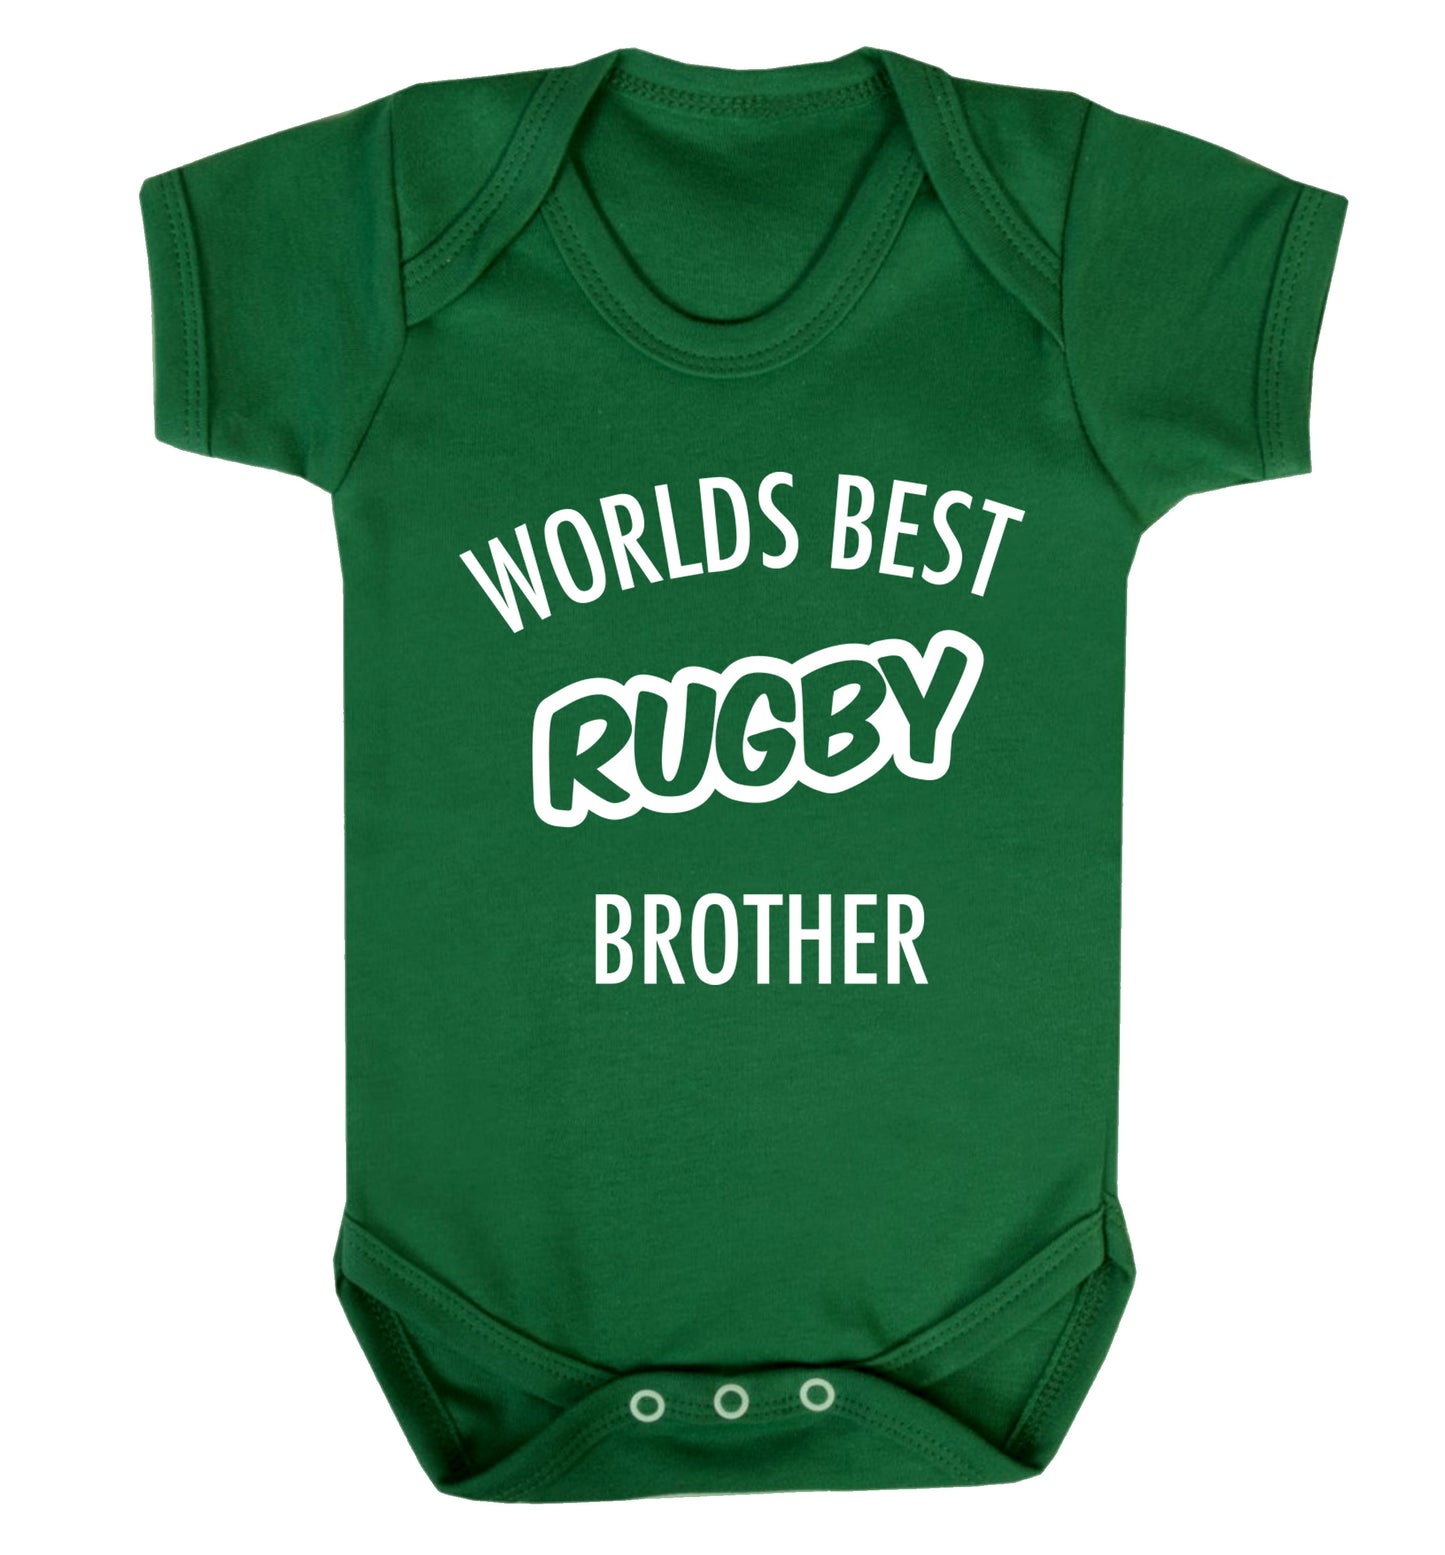 Worlds best rugby brother Baby Vest green 18-24 months